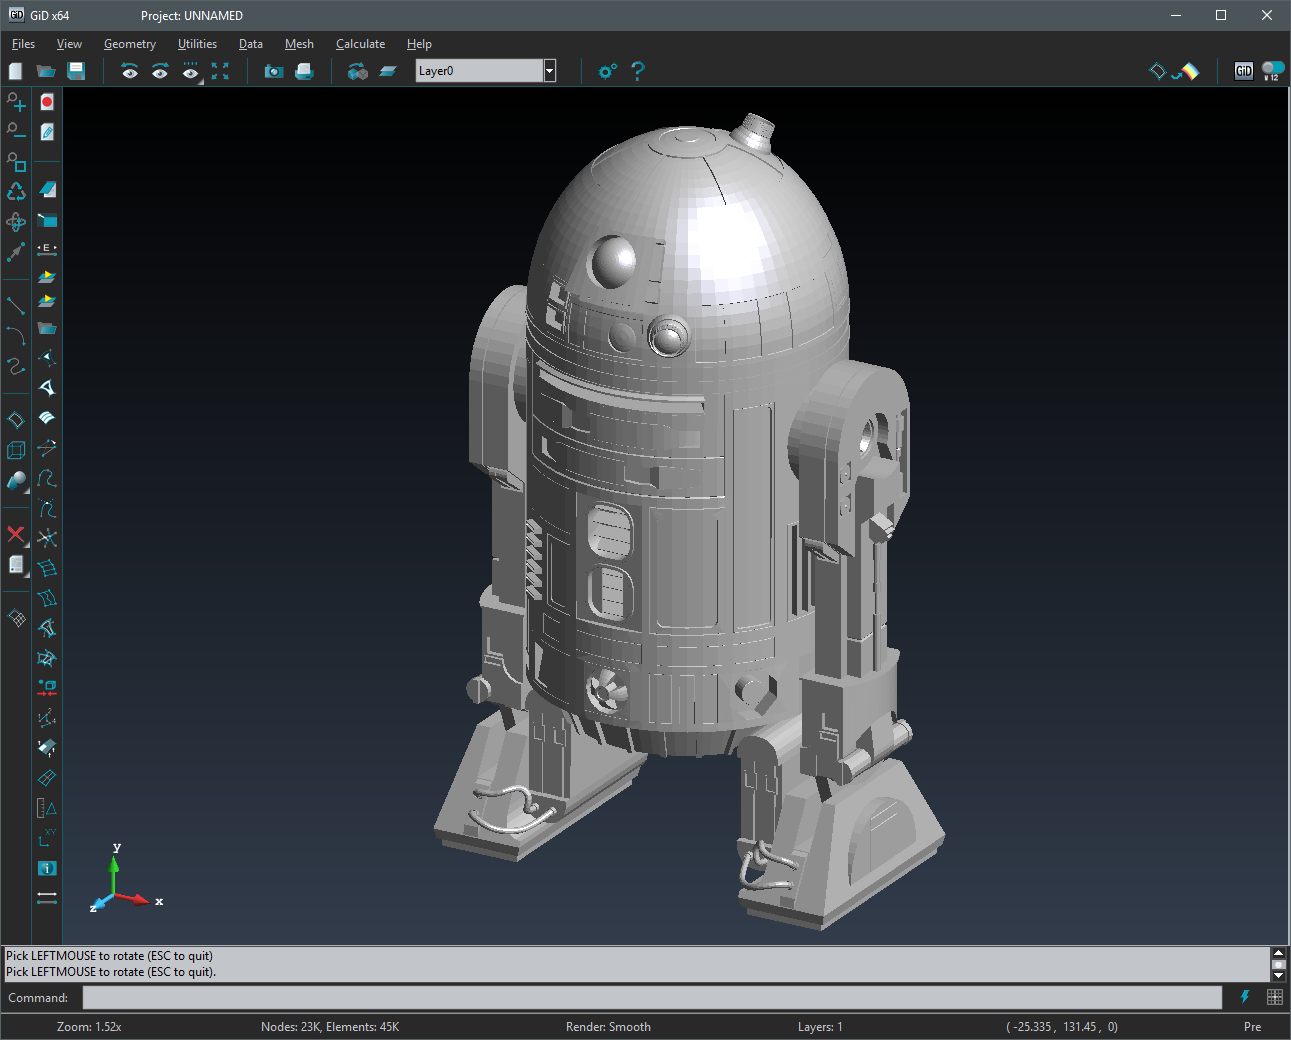 R2-D2 3D model imported in GiD